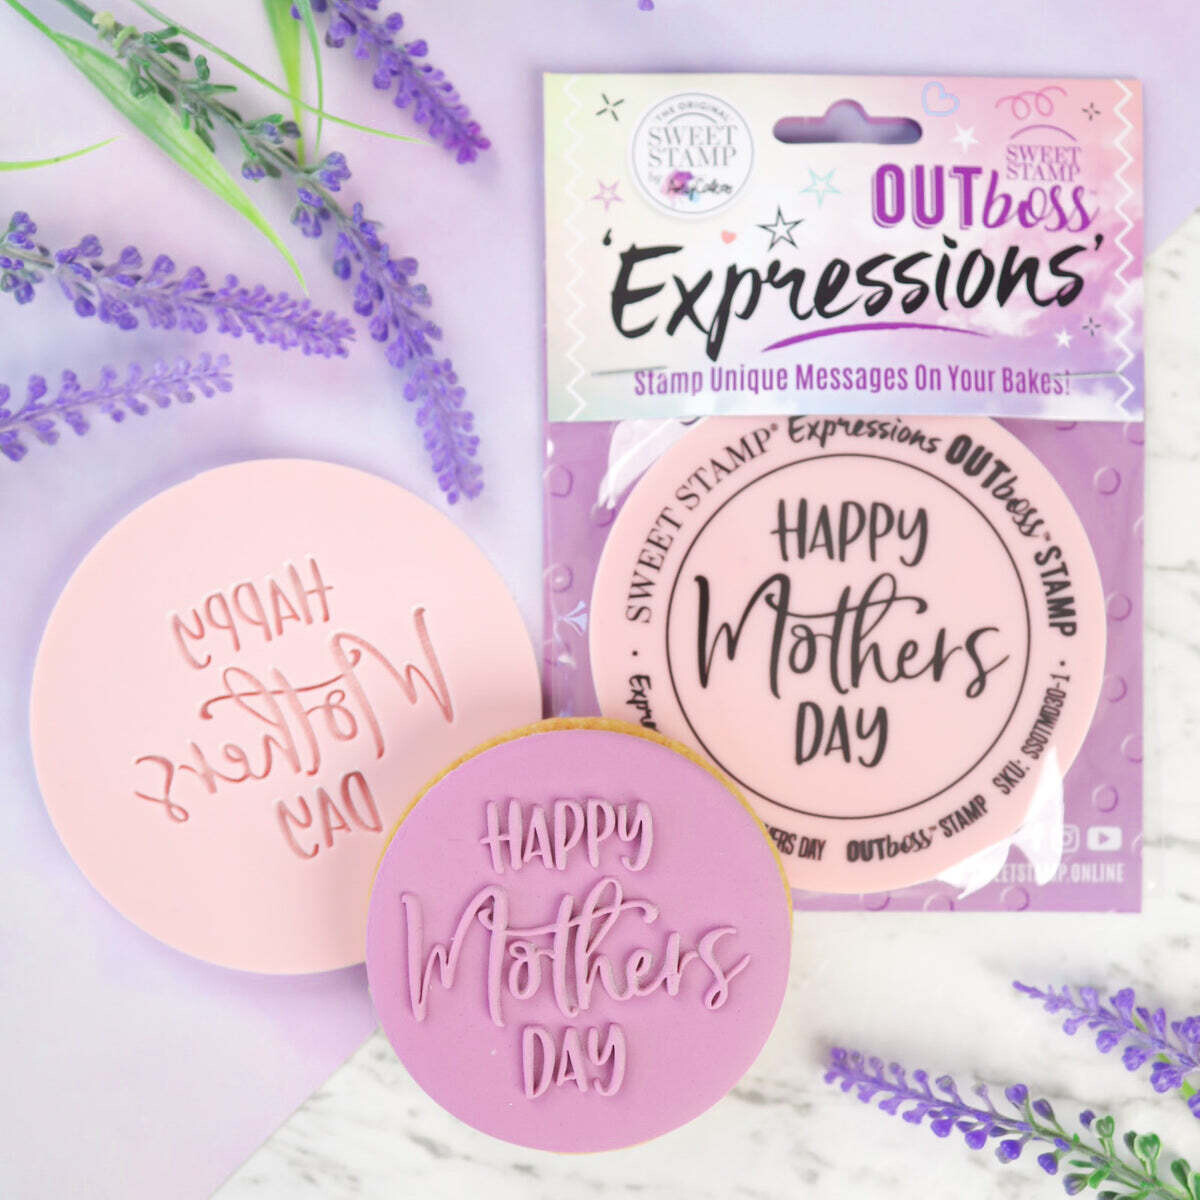 Sweet Stamp -OUTboss -'HAPPY MOTHERS' DAY' -TRENDY Σφραγίδα